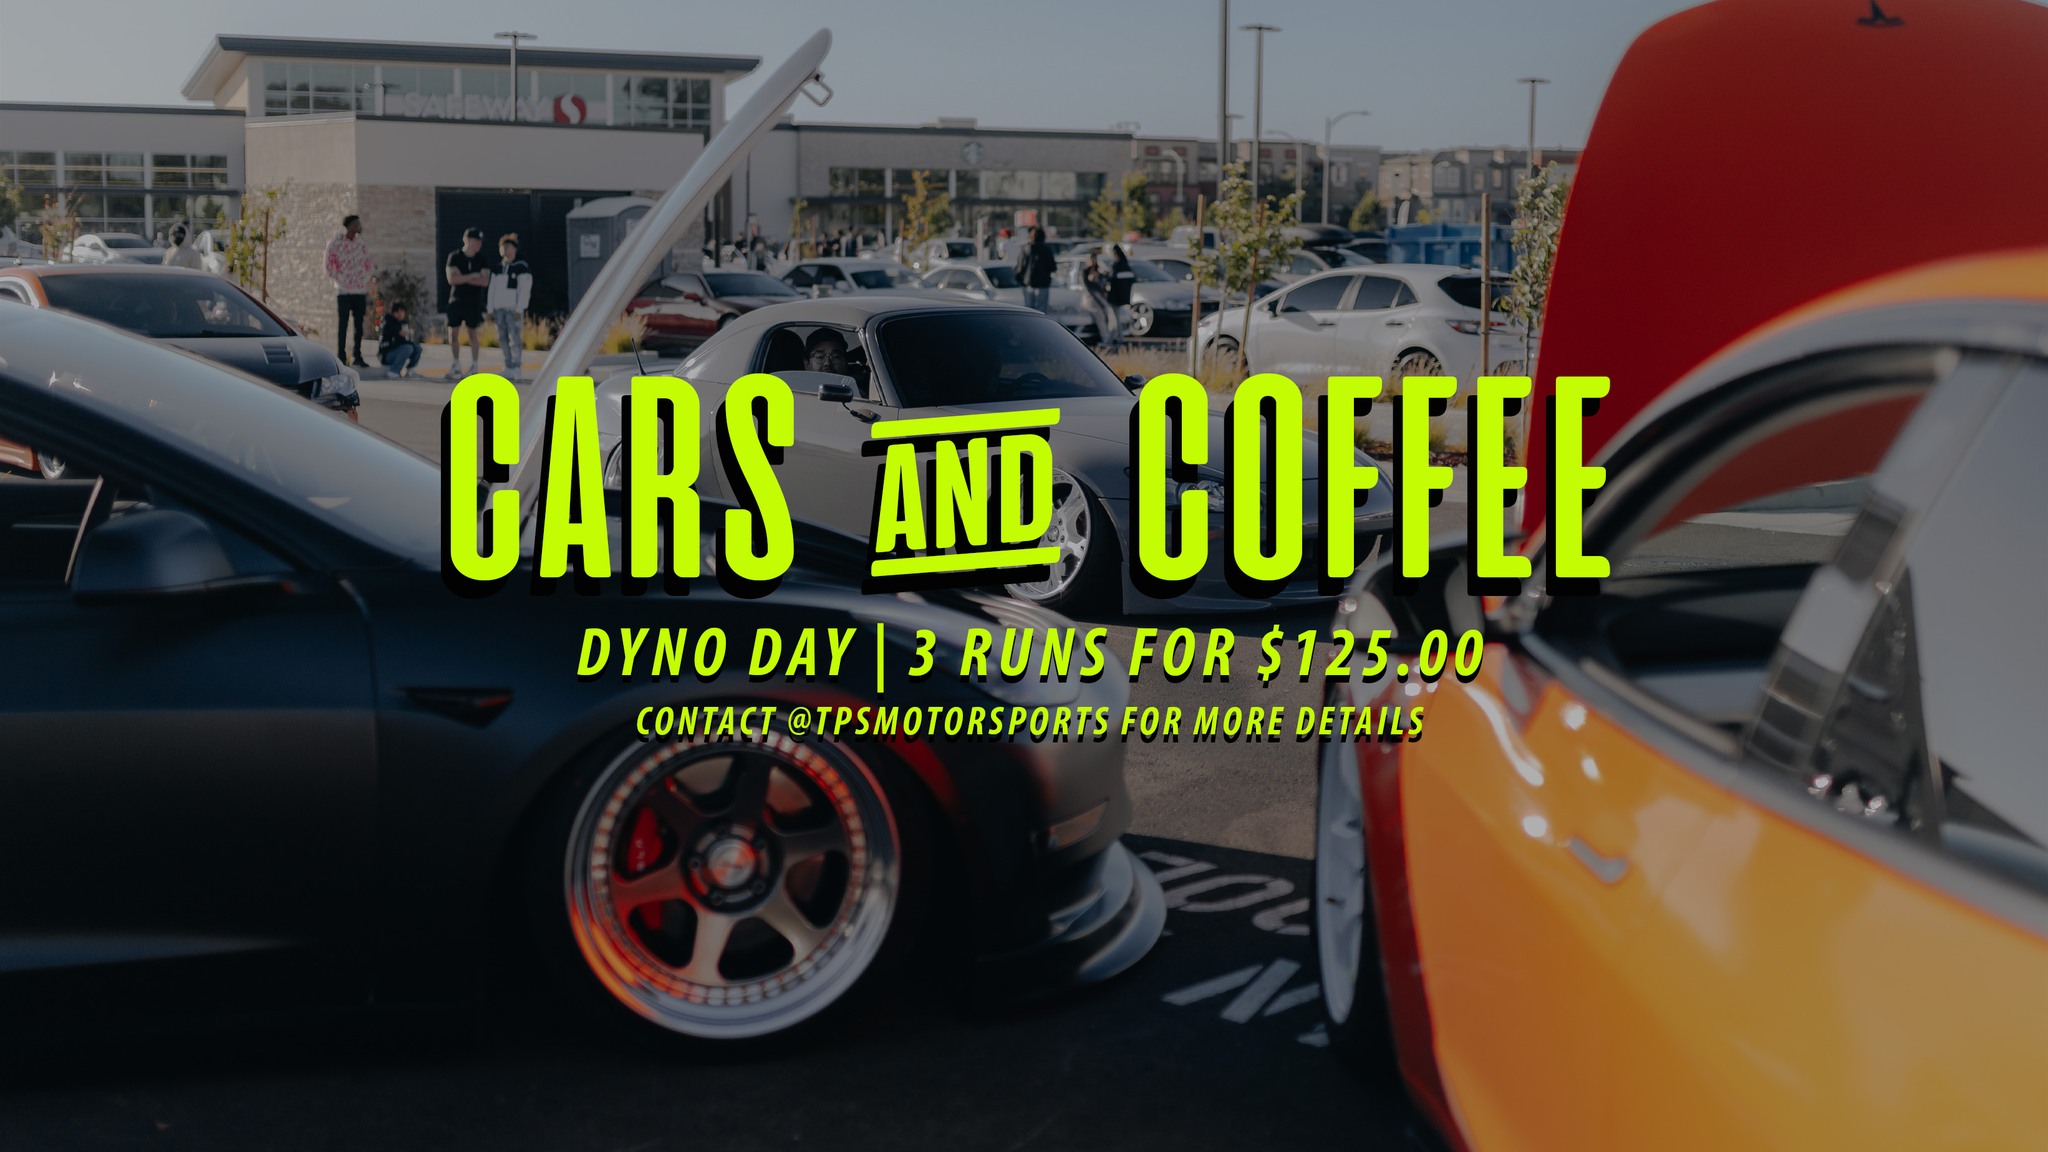 https://norcalcarculture.com/wp-content/uploads/2022/10/TPS-Cars-and-Coffee.jpg